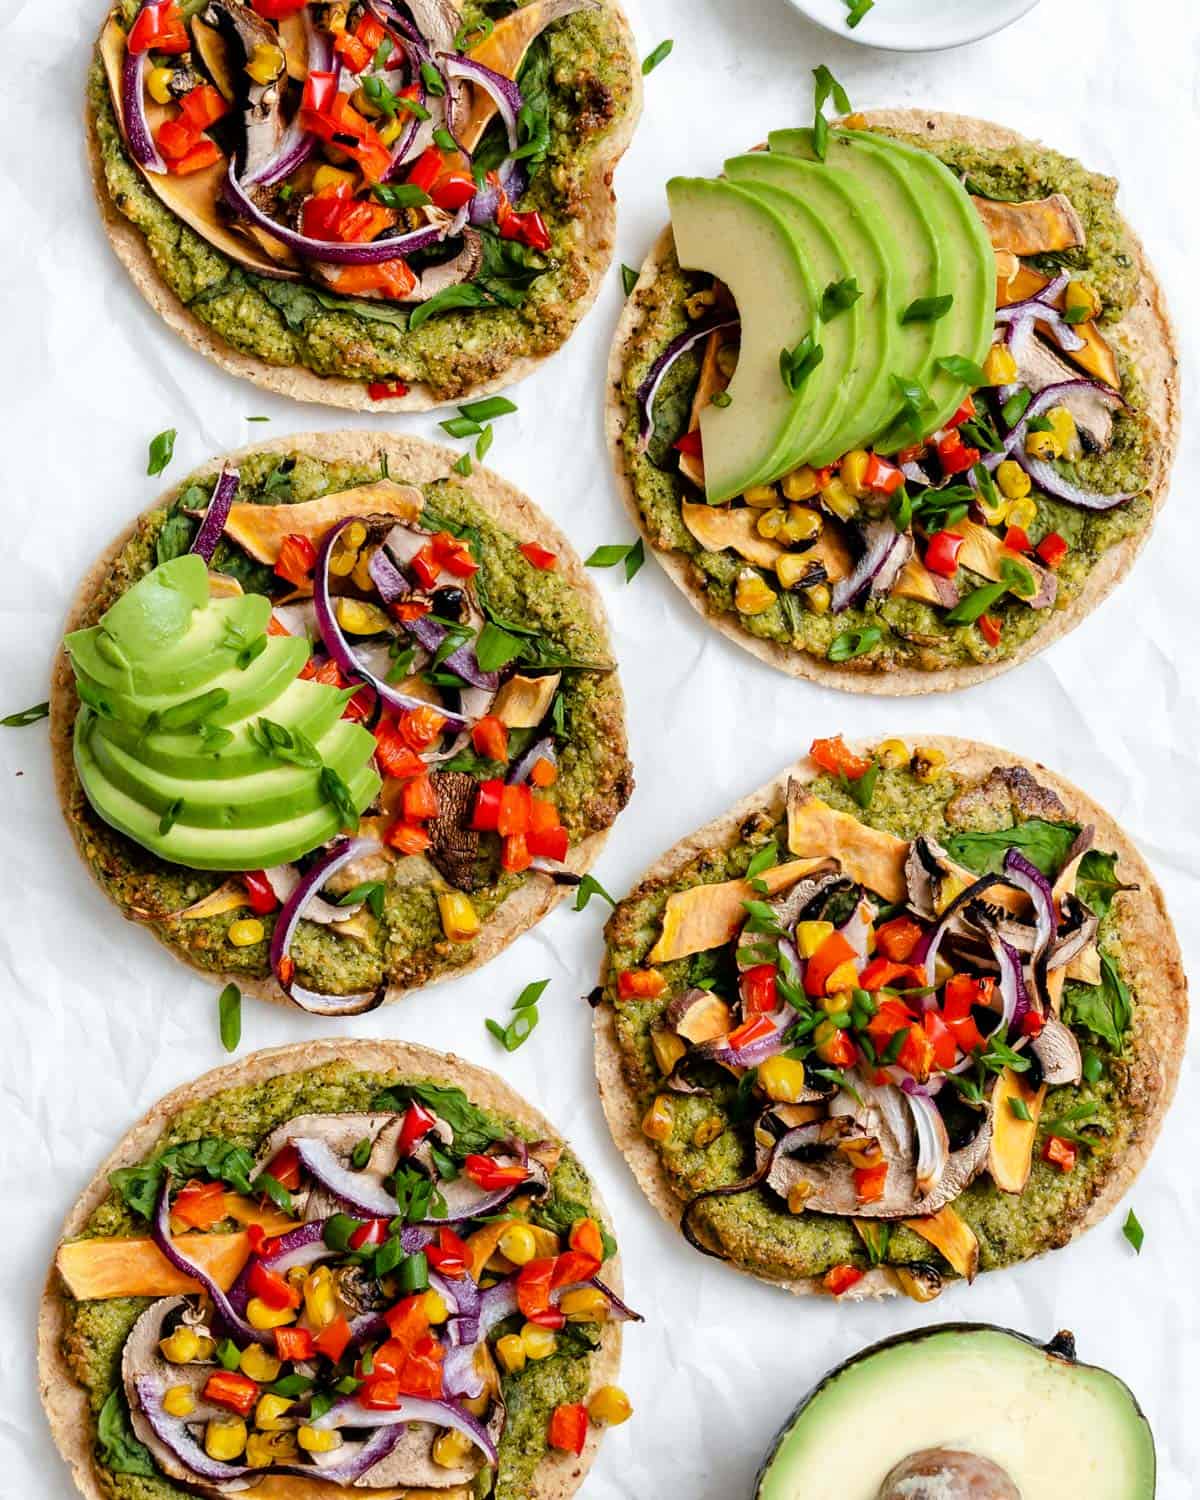 several completed Vegan Tortilla Pizzas against a white background